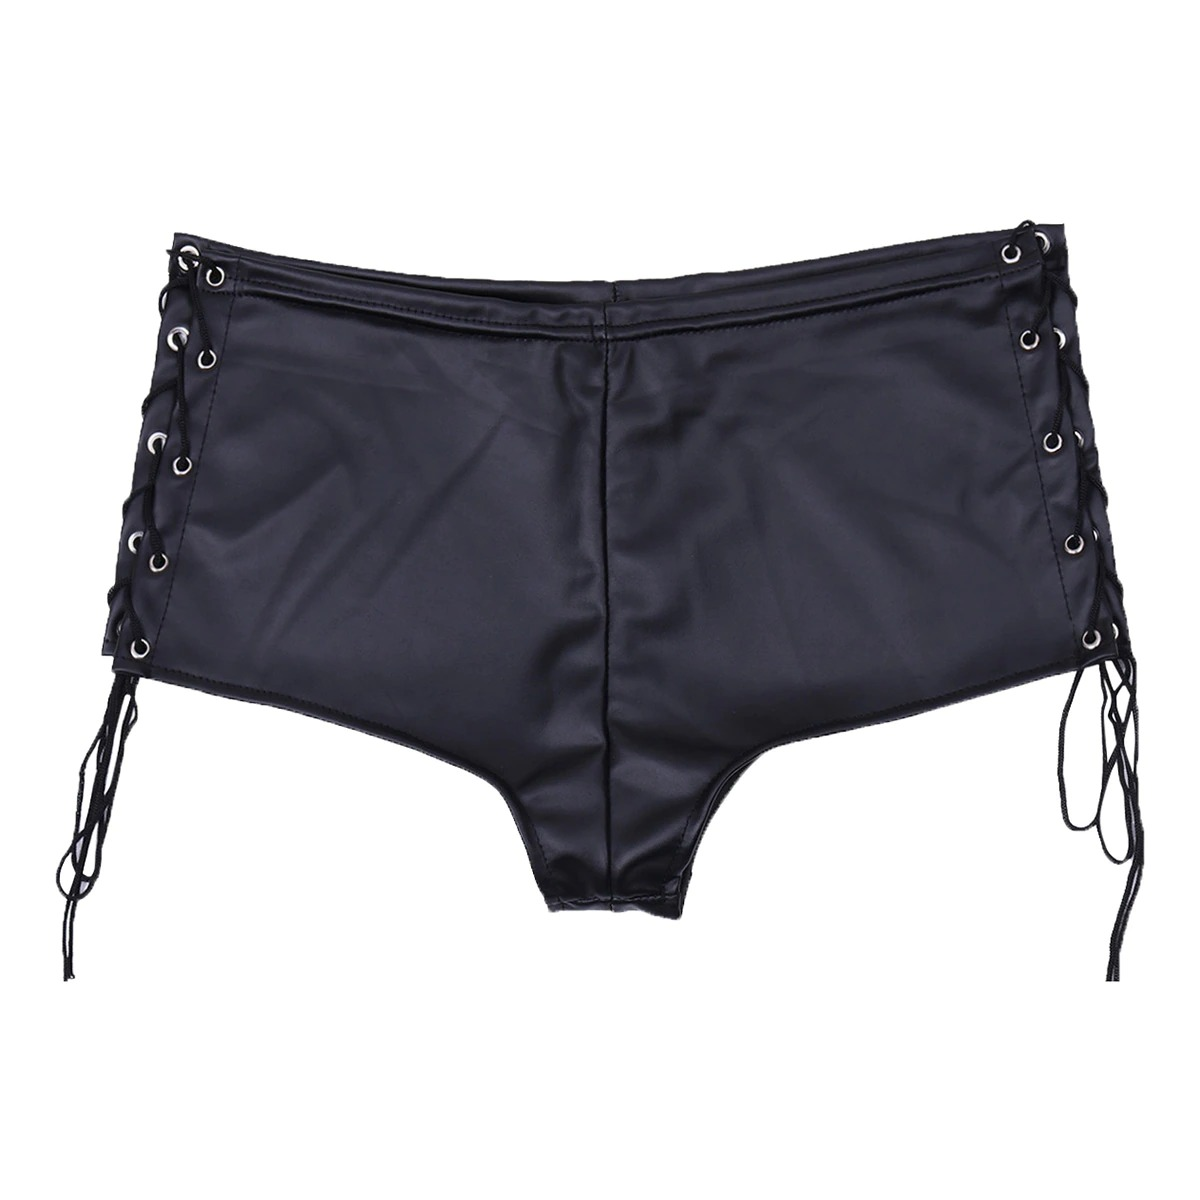 Patent Leather Ladies Panties with Lace Up / Sexy Black Hollow Out Side Briefs - EVE's SECRETS